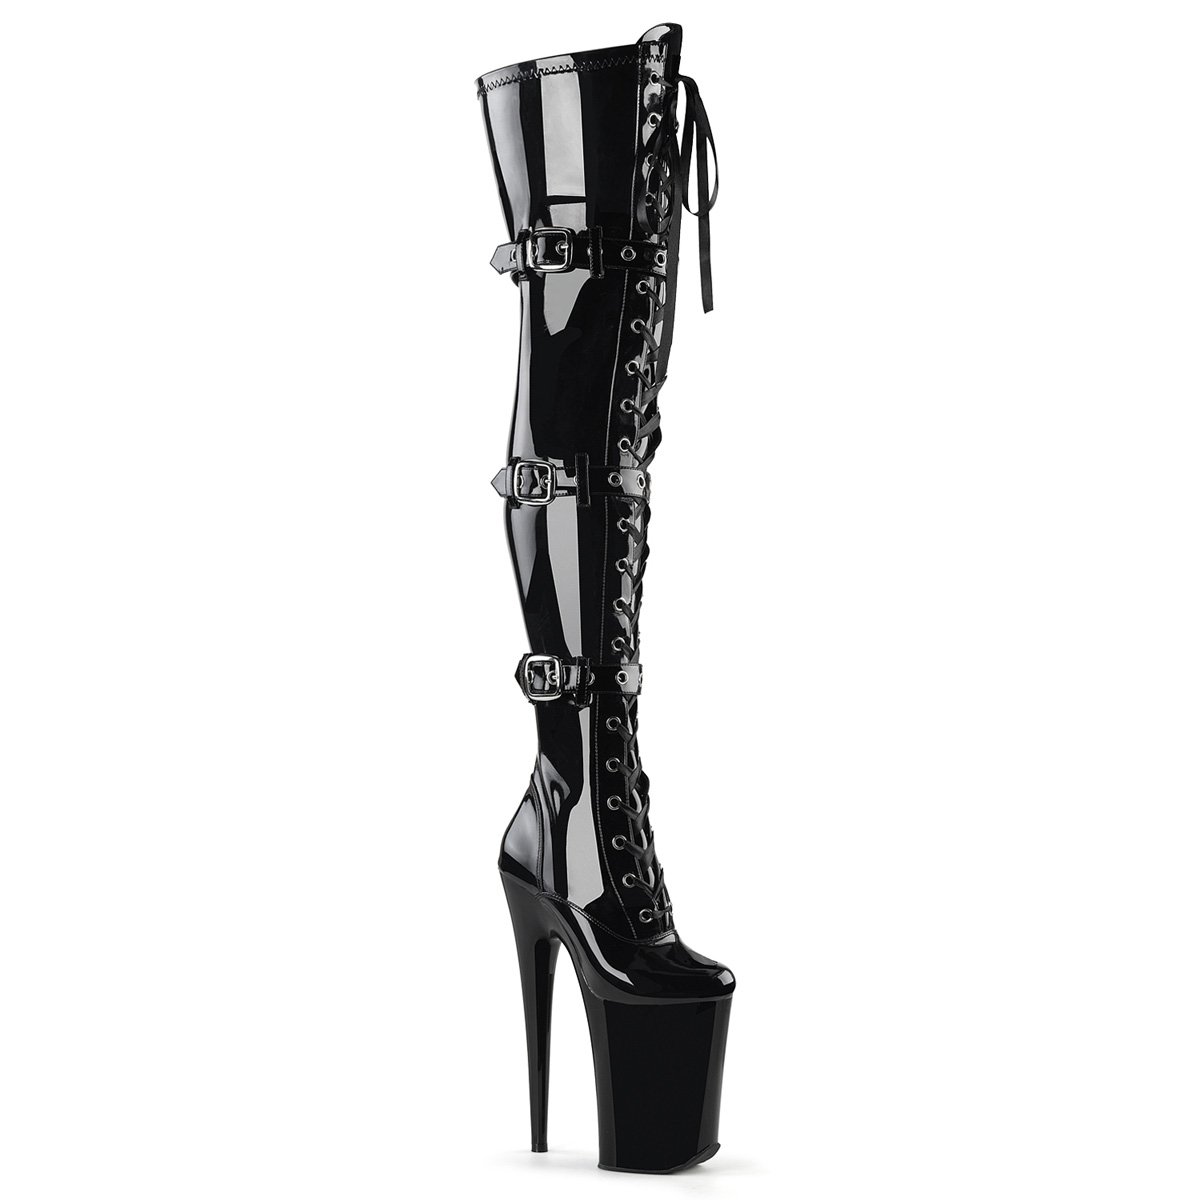 Pleaser Infinity-3028 Platforms | Buy Sexy Shoes at Shoefreaks.ca